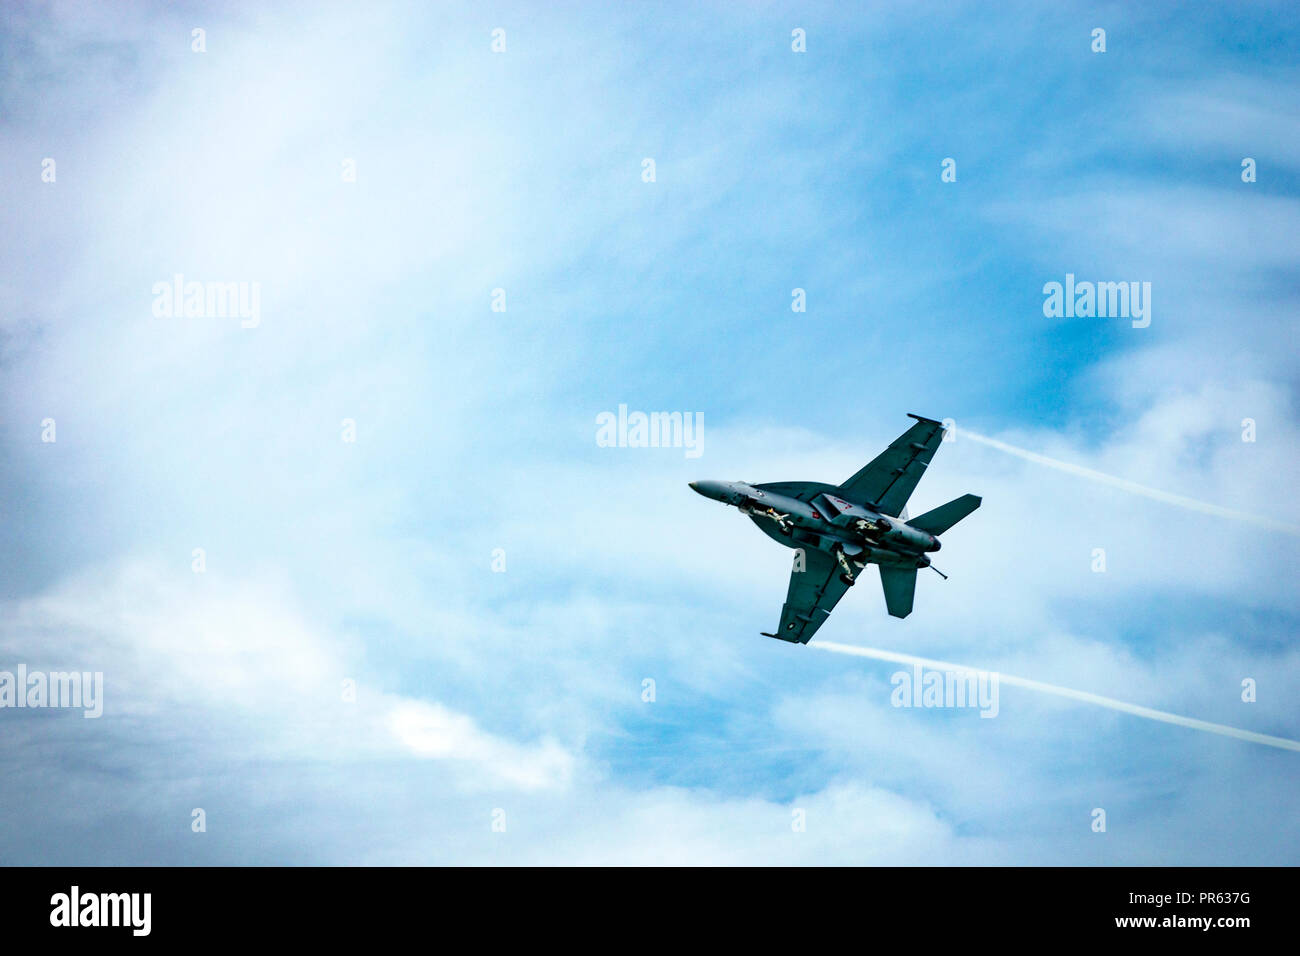 Miami Beach Florida, National Salute to America's Heroes Air & Sea Show, McDonnell Douglas F/A-18 Hornet Twin-Engine, supersonic, all-Weather, carrier-capa Foto Stock